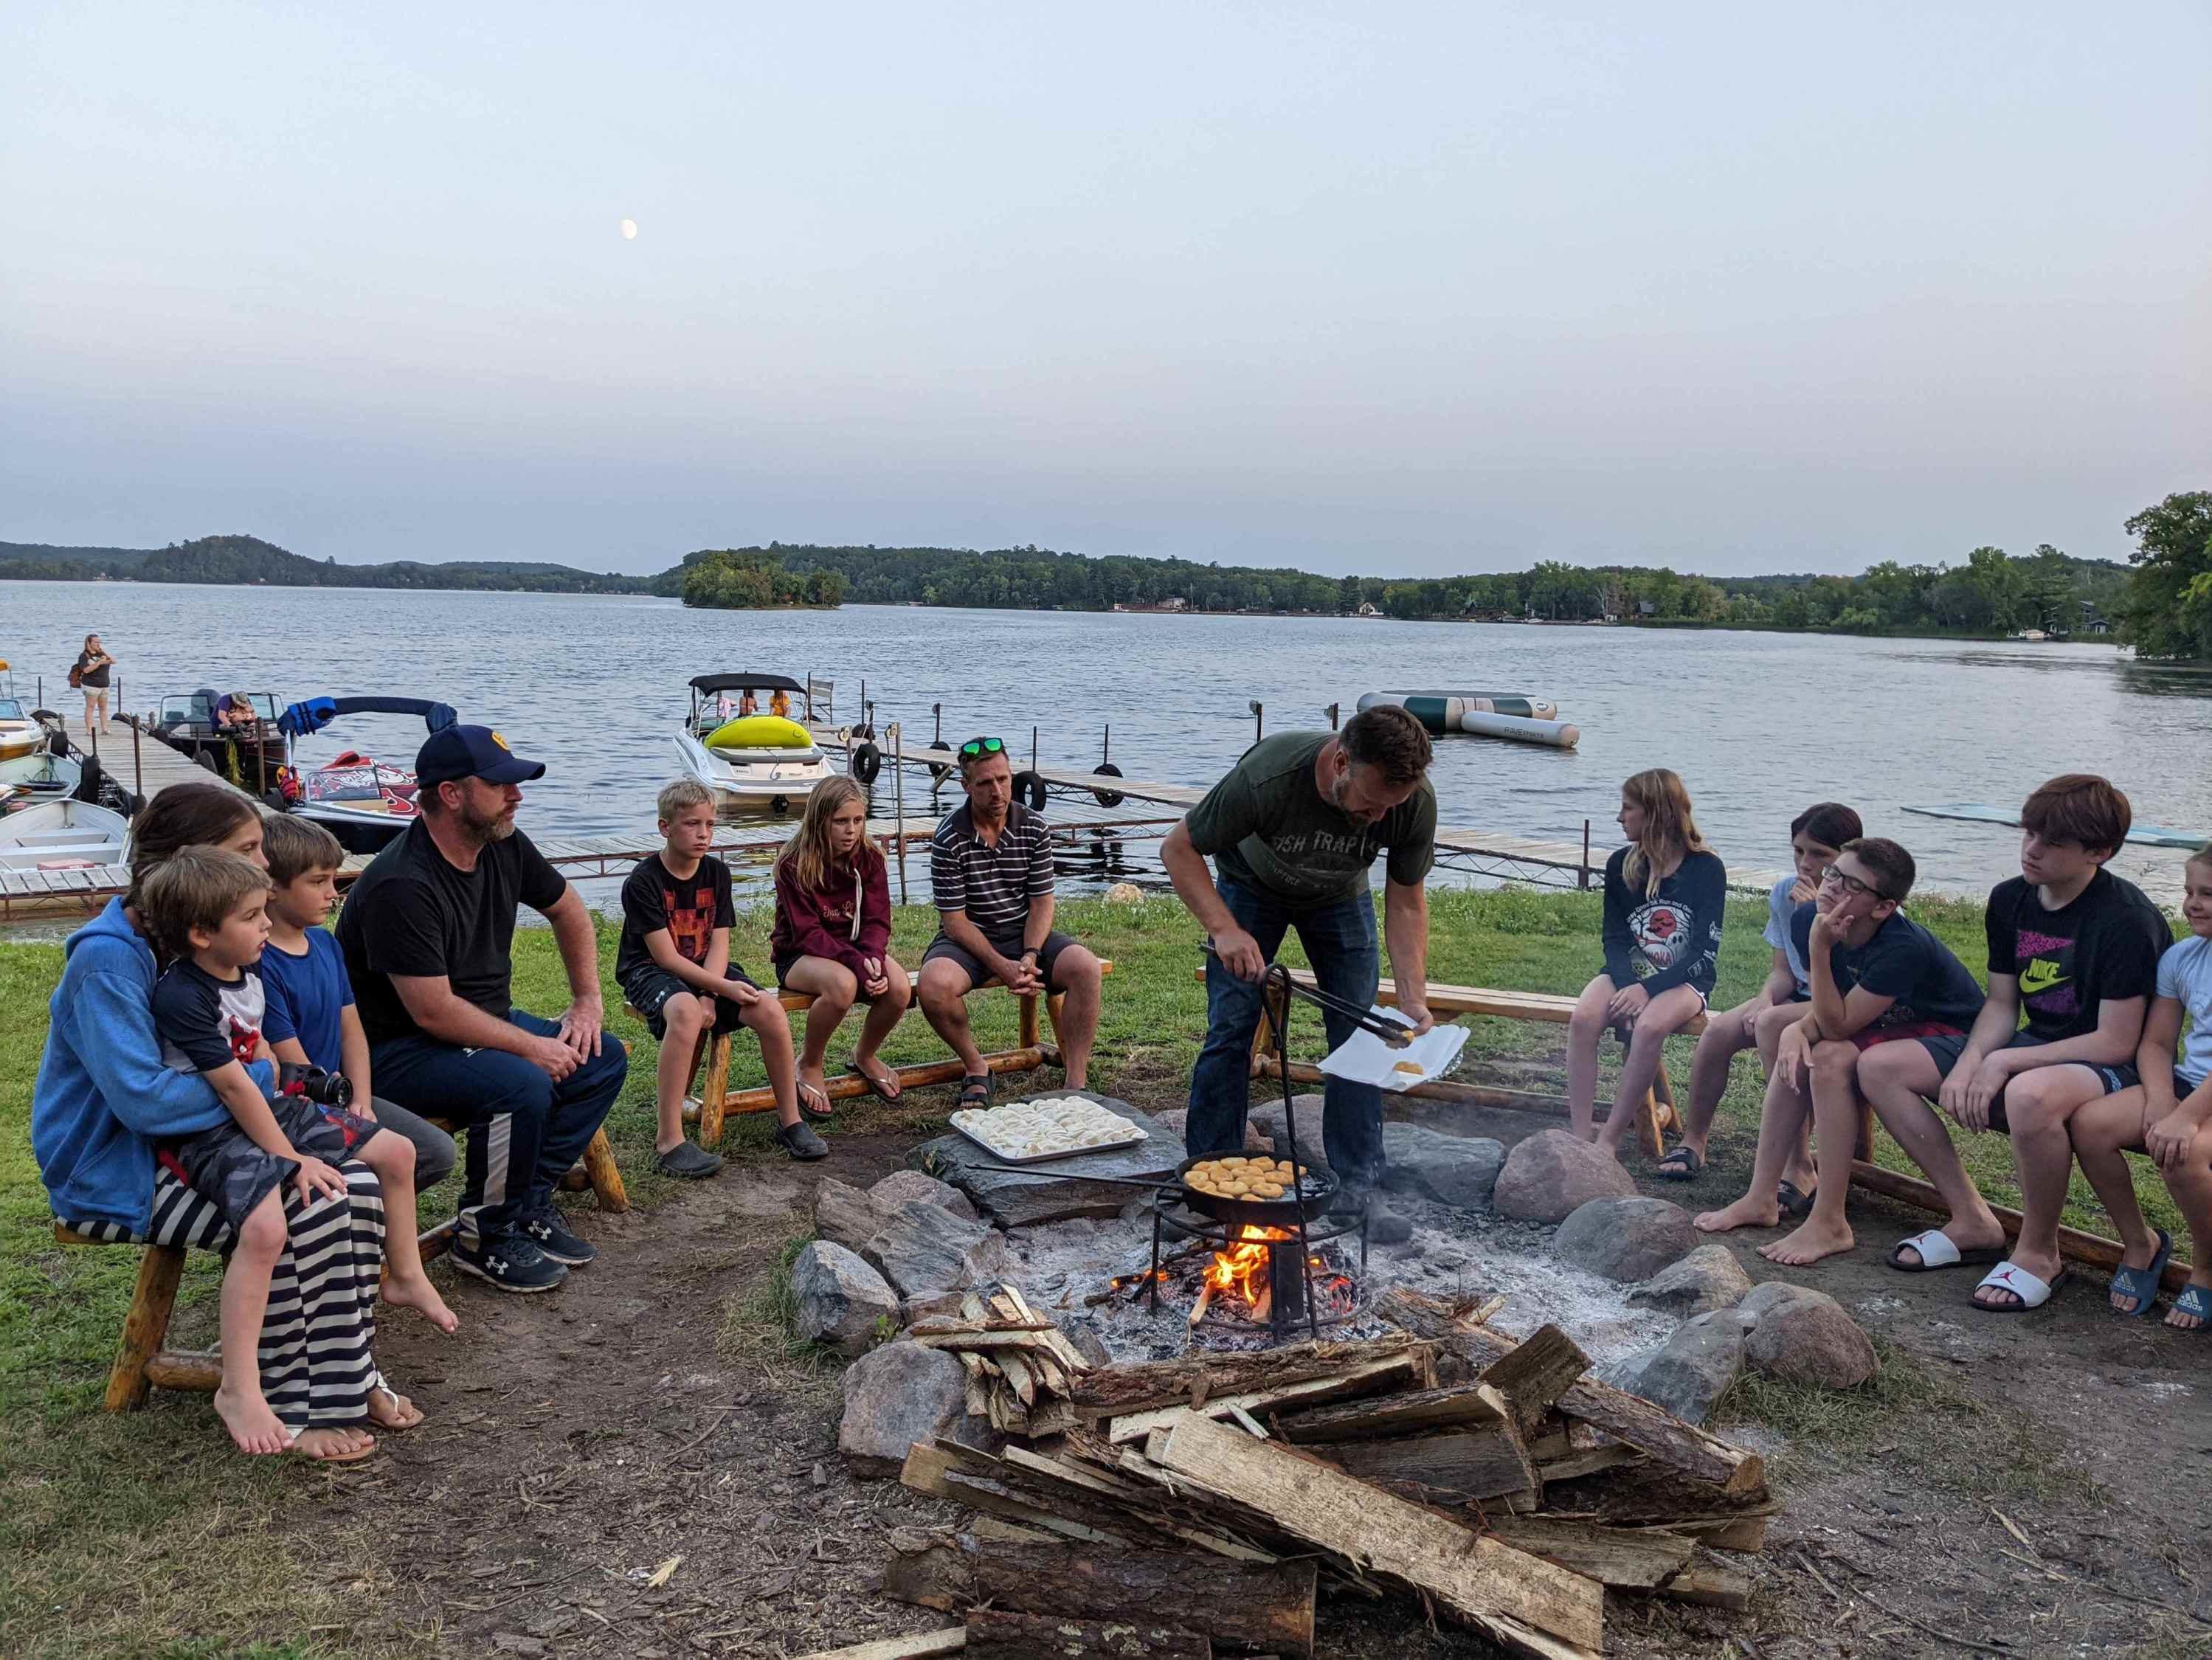 Campfire Bay is a Brainerd Lakes Area resort with organized activities like weekly donuts over the fire